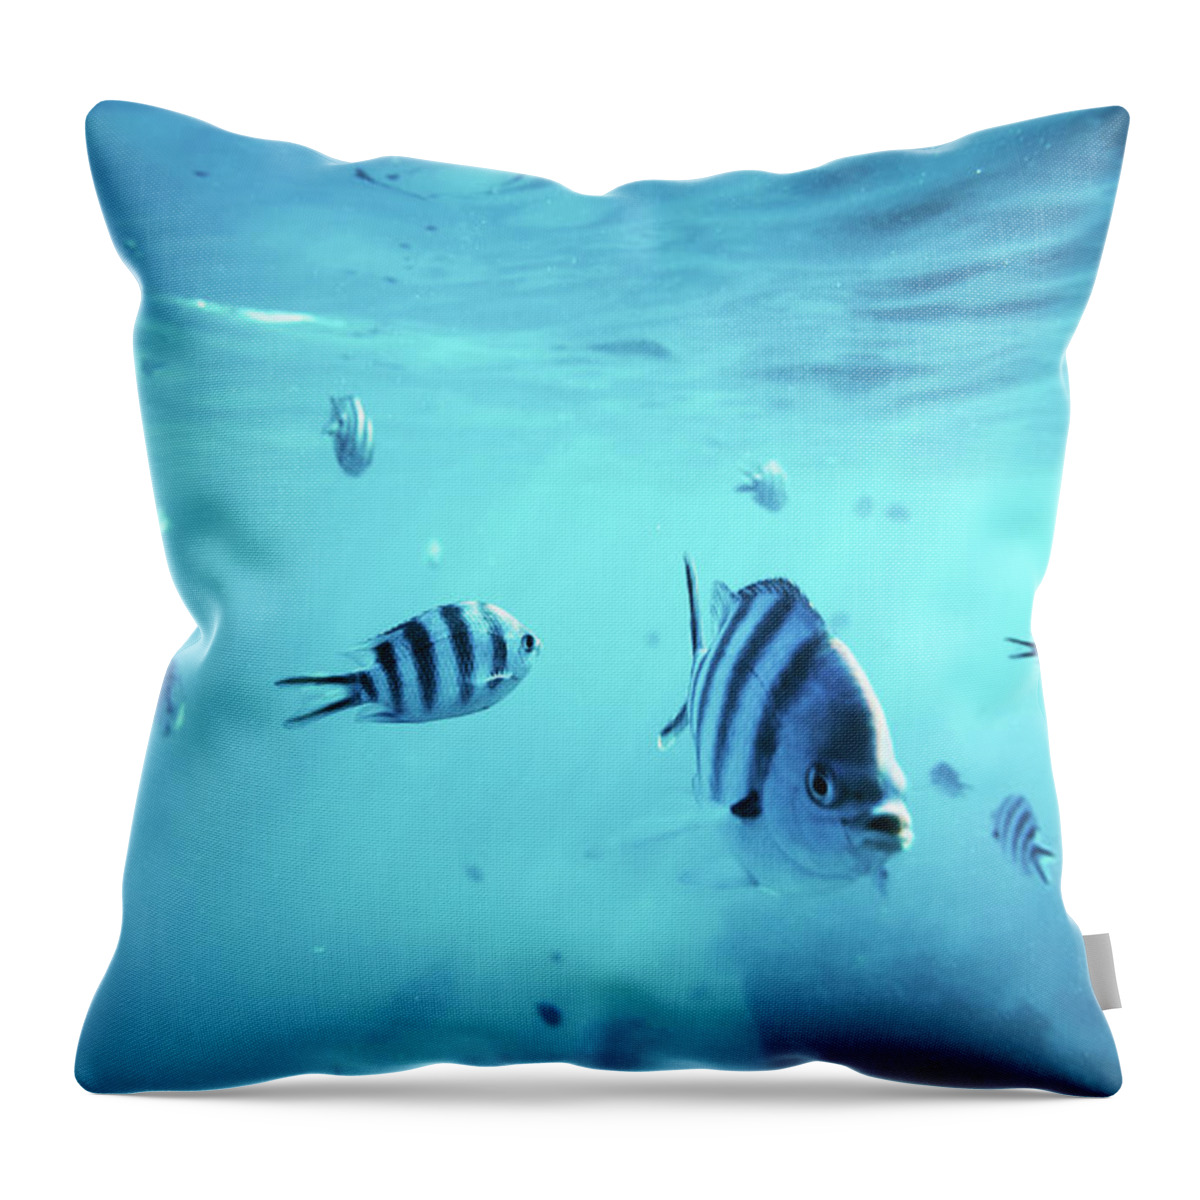 Underwater Throw Pillow featuring the photograph Diving With Fishes by Borchee